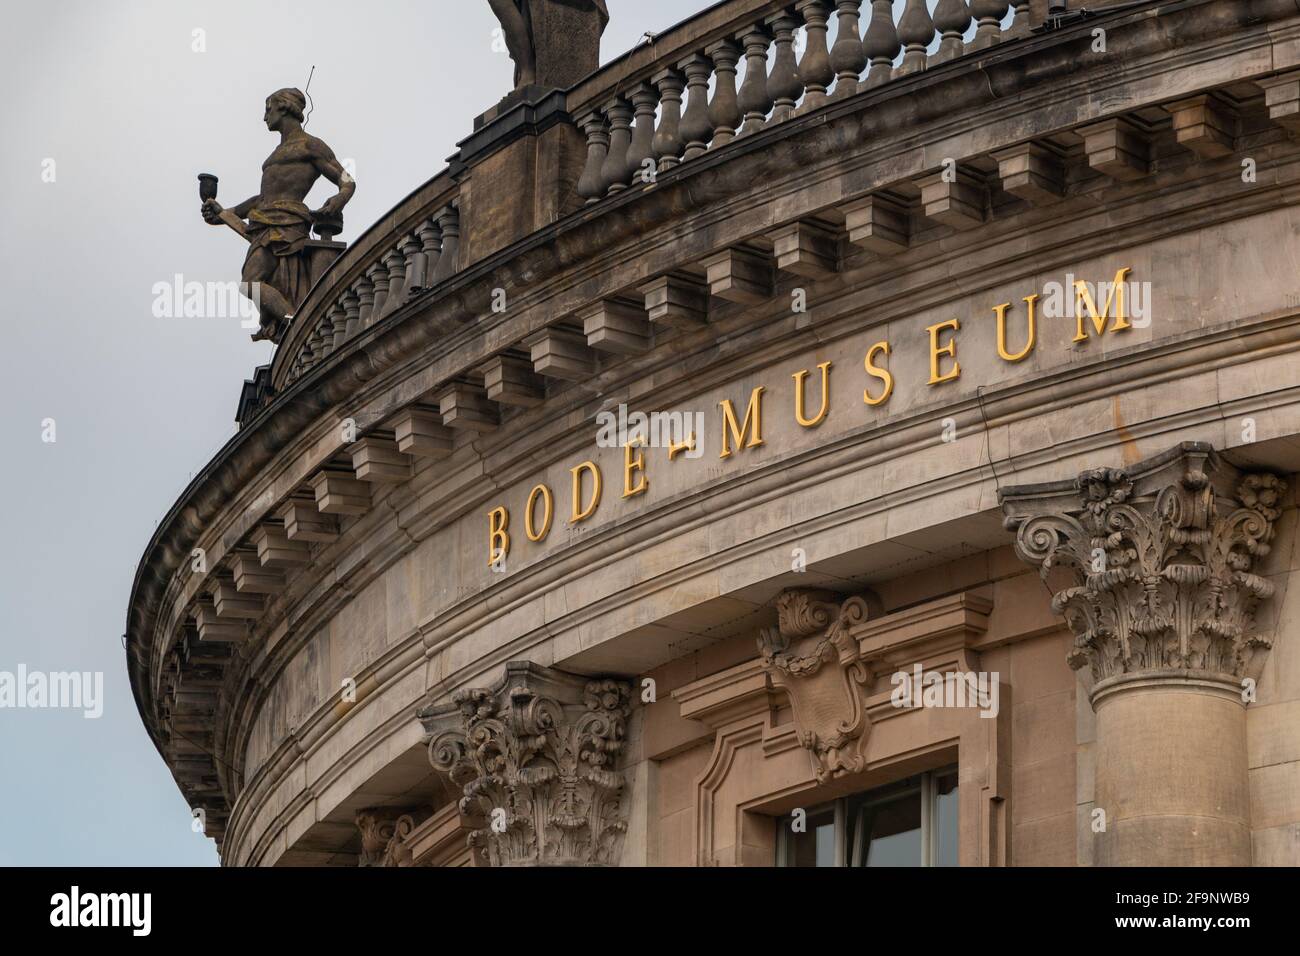 A picture of the main facade of the Bode Museum, in Berlin. Stock Photo